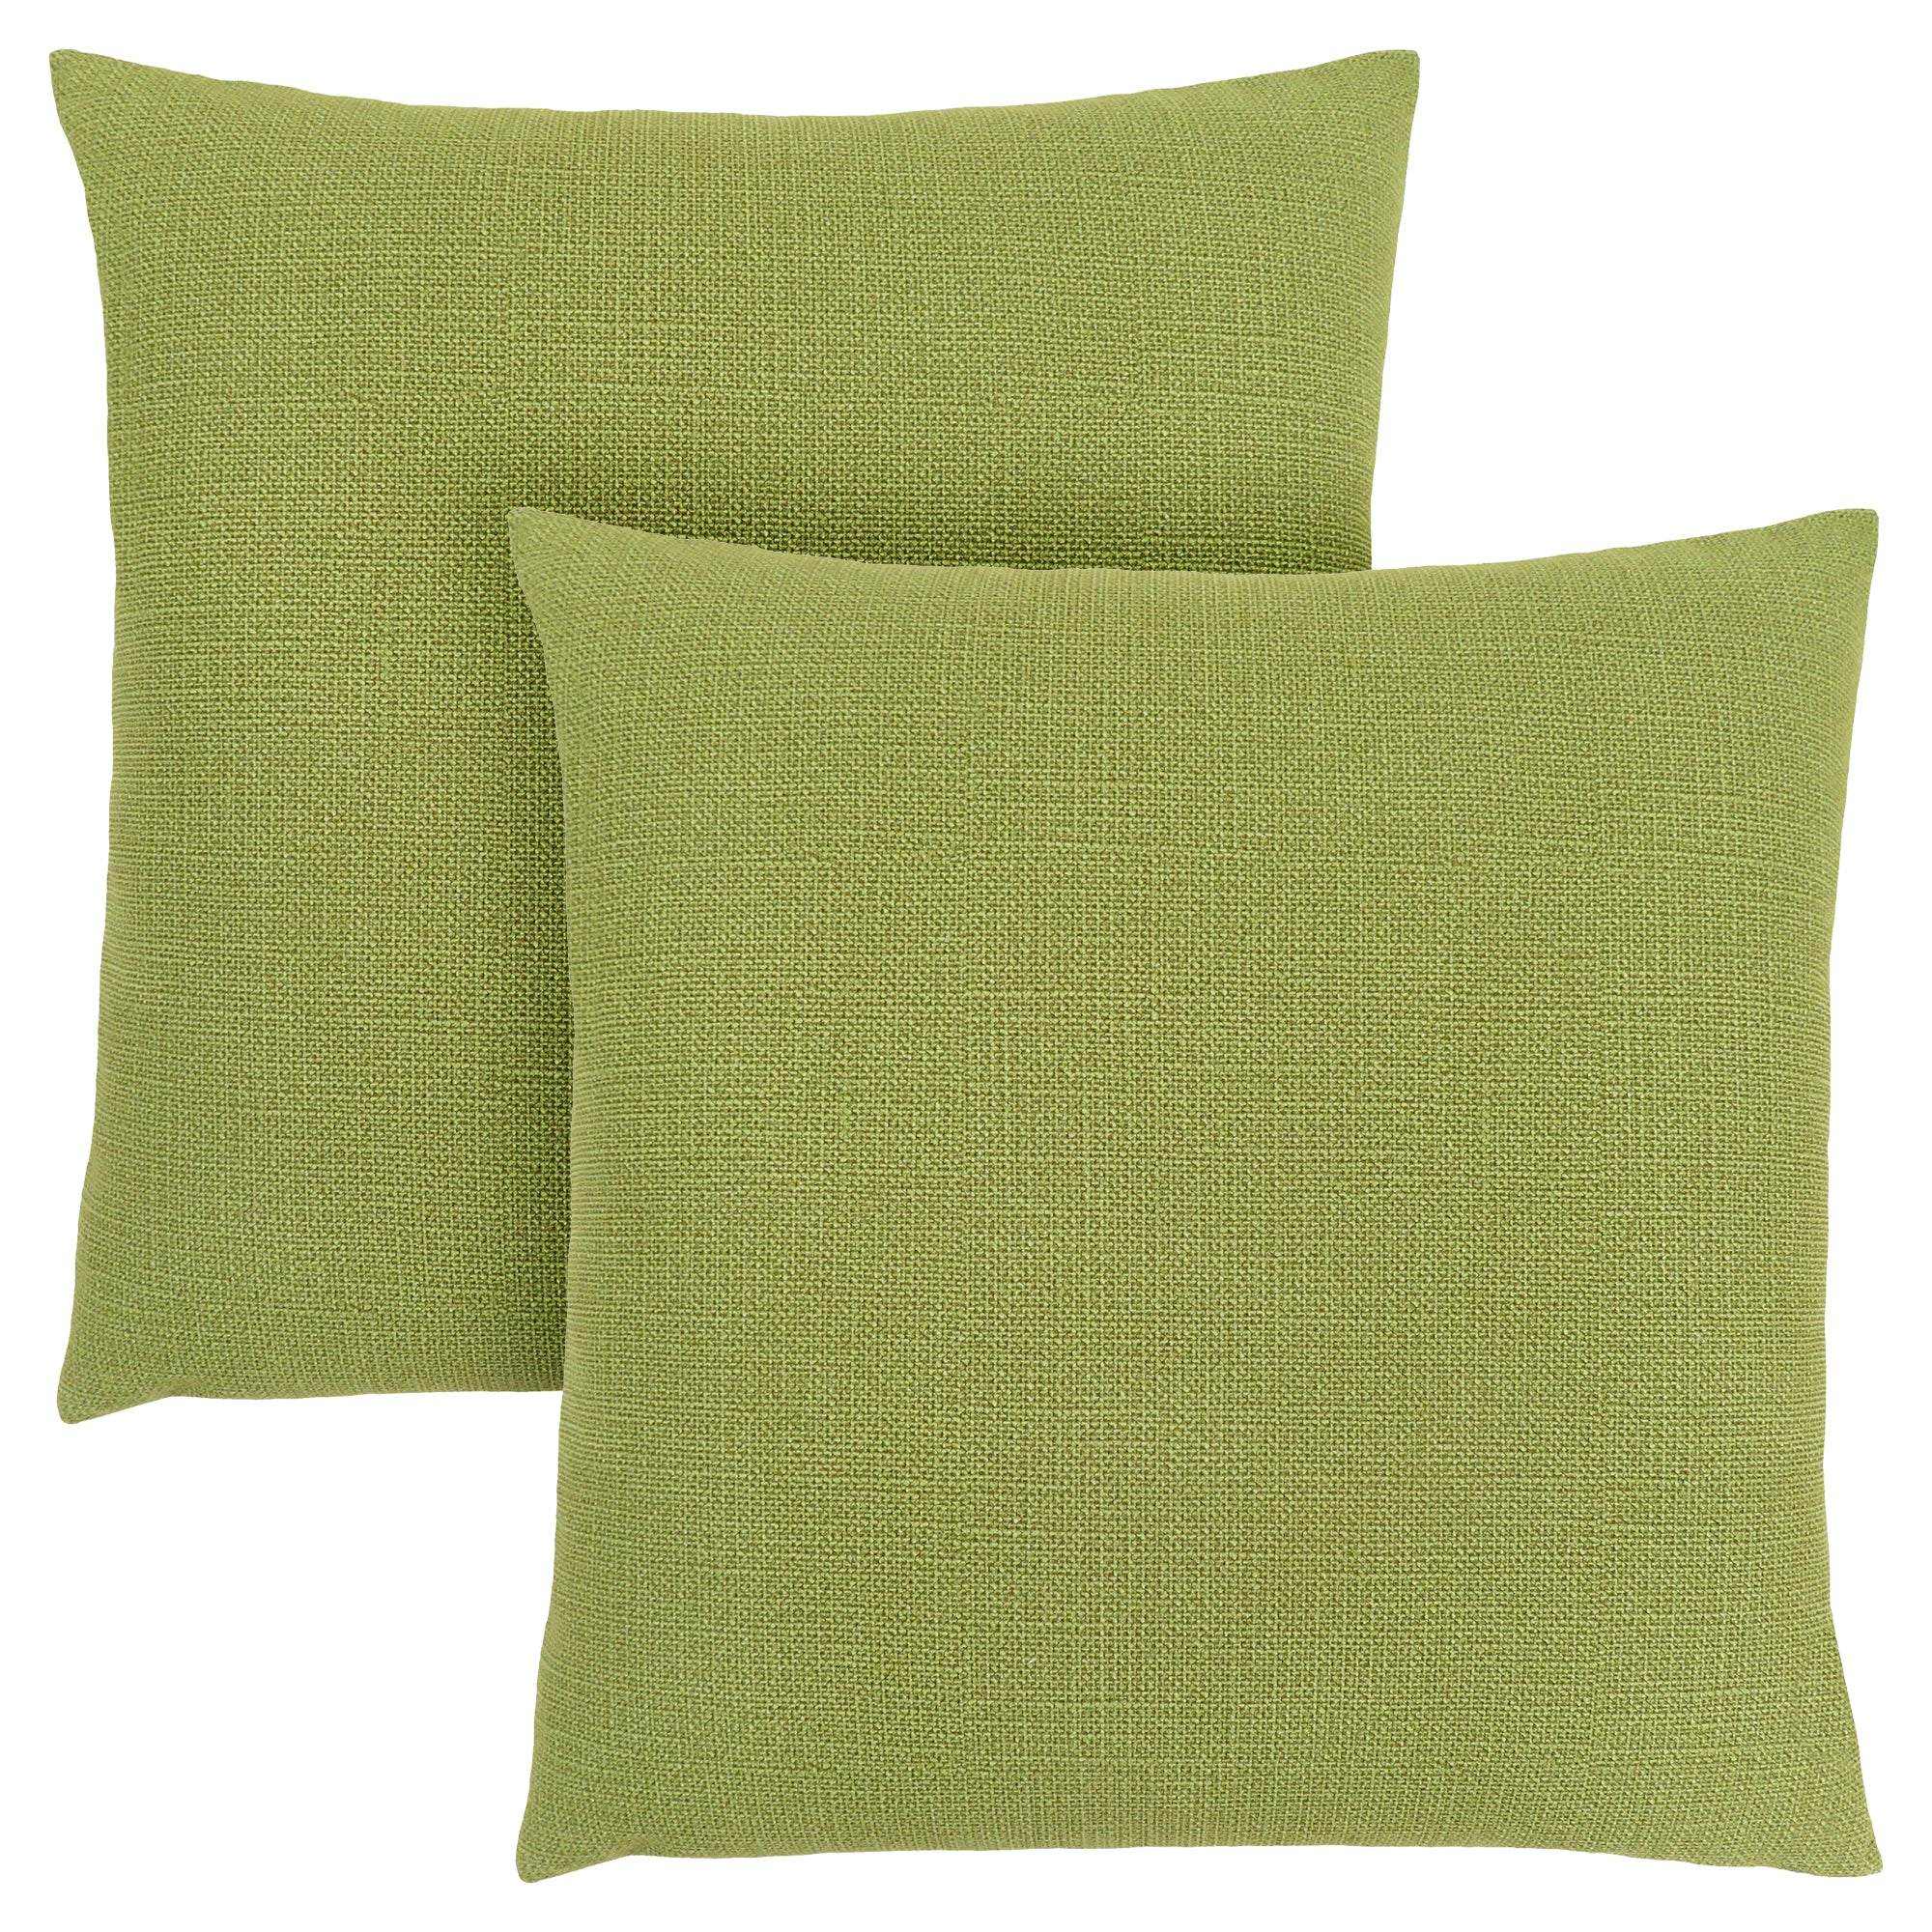 Pillow - 18X 18 / Patterned Lime Green / 2Pcs